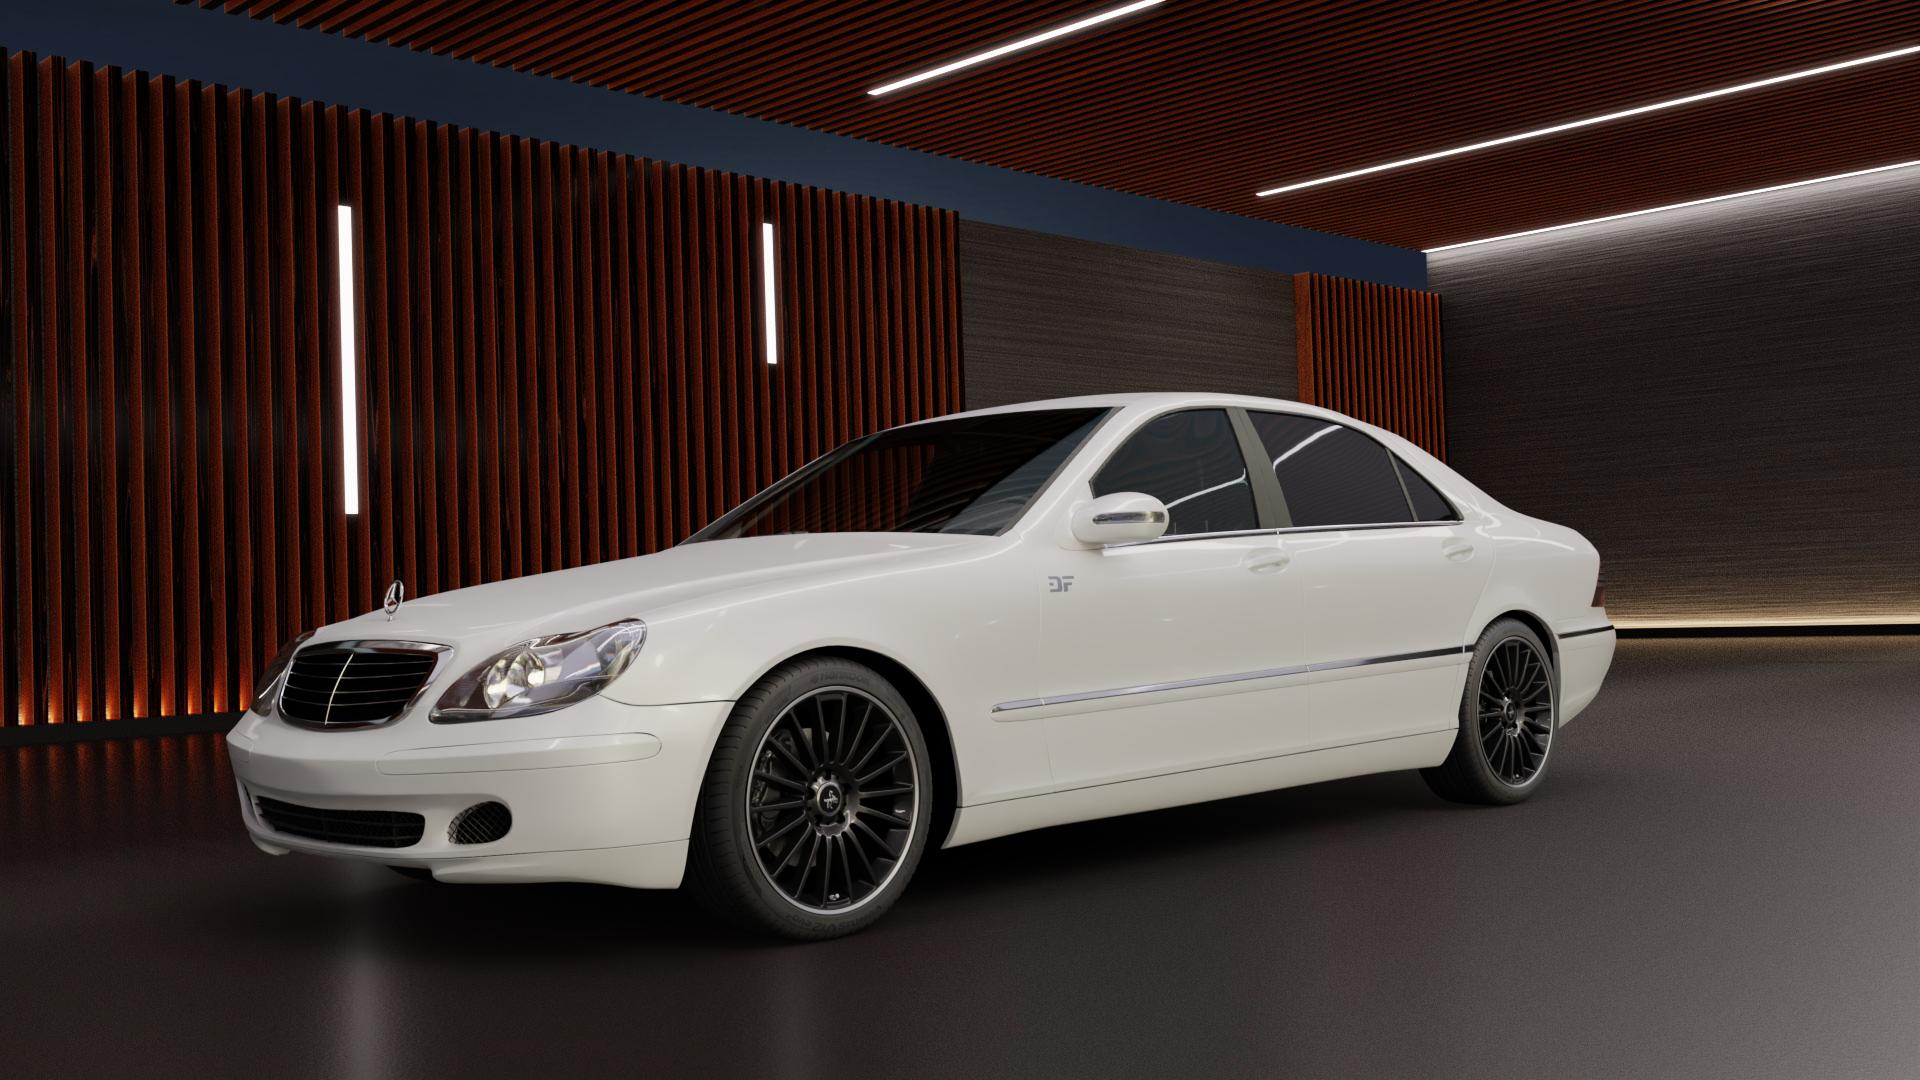 Mercedes S-Class Type W220 4,0l S 400 CDI 191kW (260 hp) Wheels and Tyre  Packages